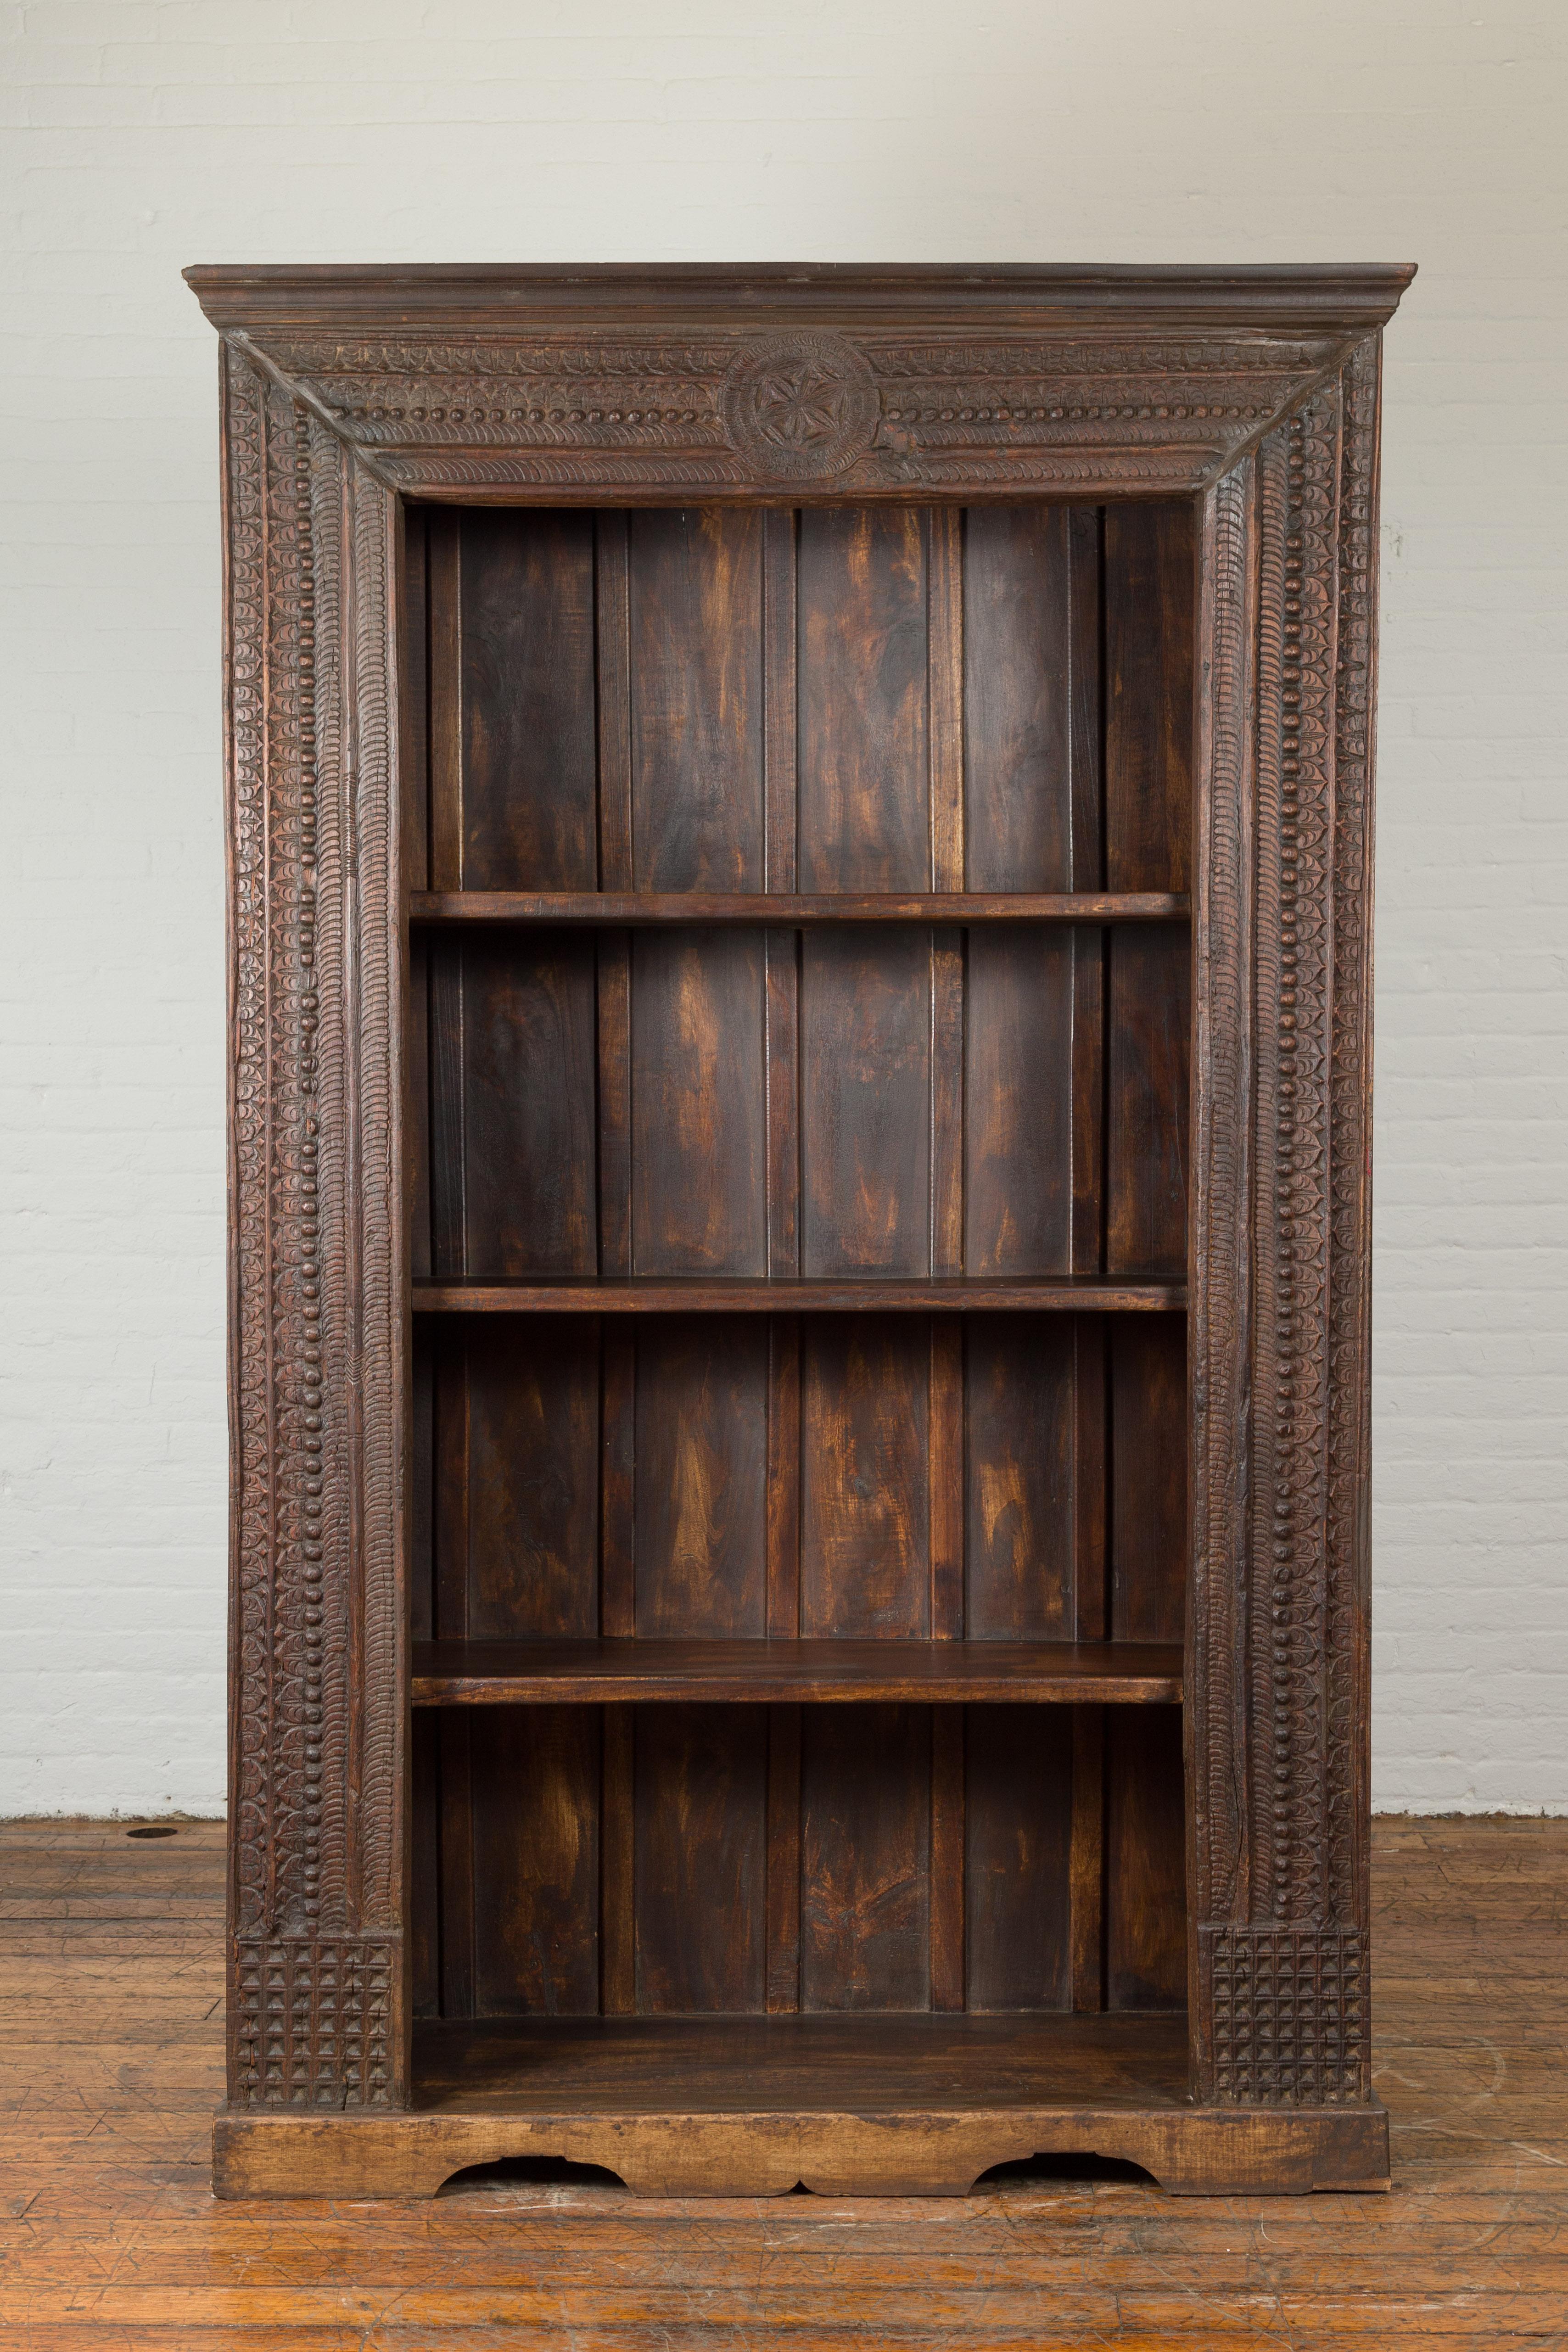 An Indian Gujarat wooden bookcase from the 19th century, with carved rosette and foliage. Created on the Western coast of India during the 19th century, this wooden bookcase features a linear silhouette accented with an abundance of carved friezes